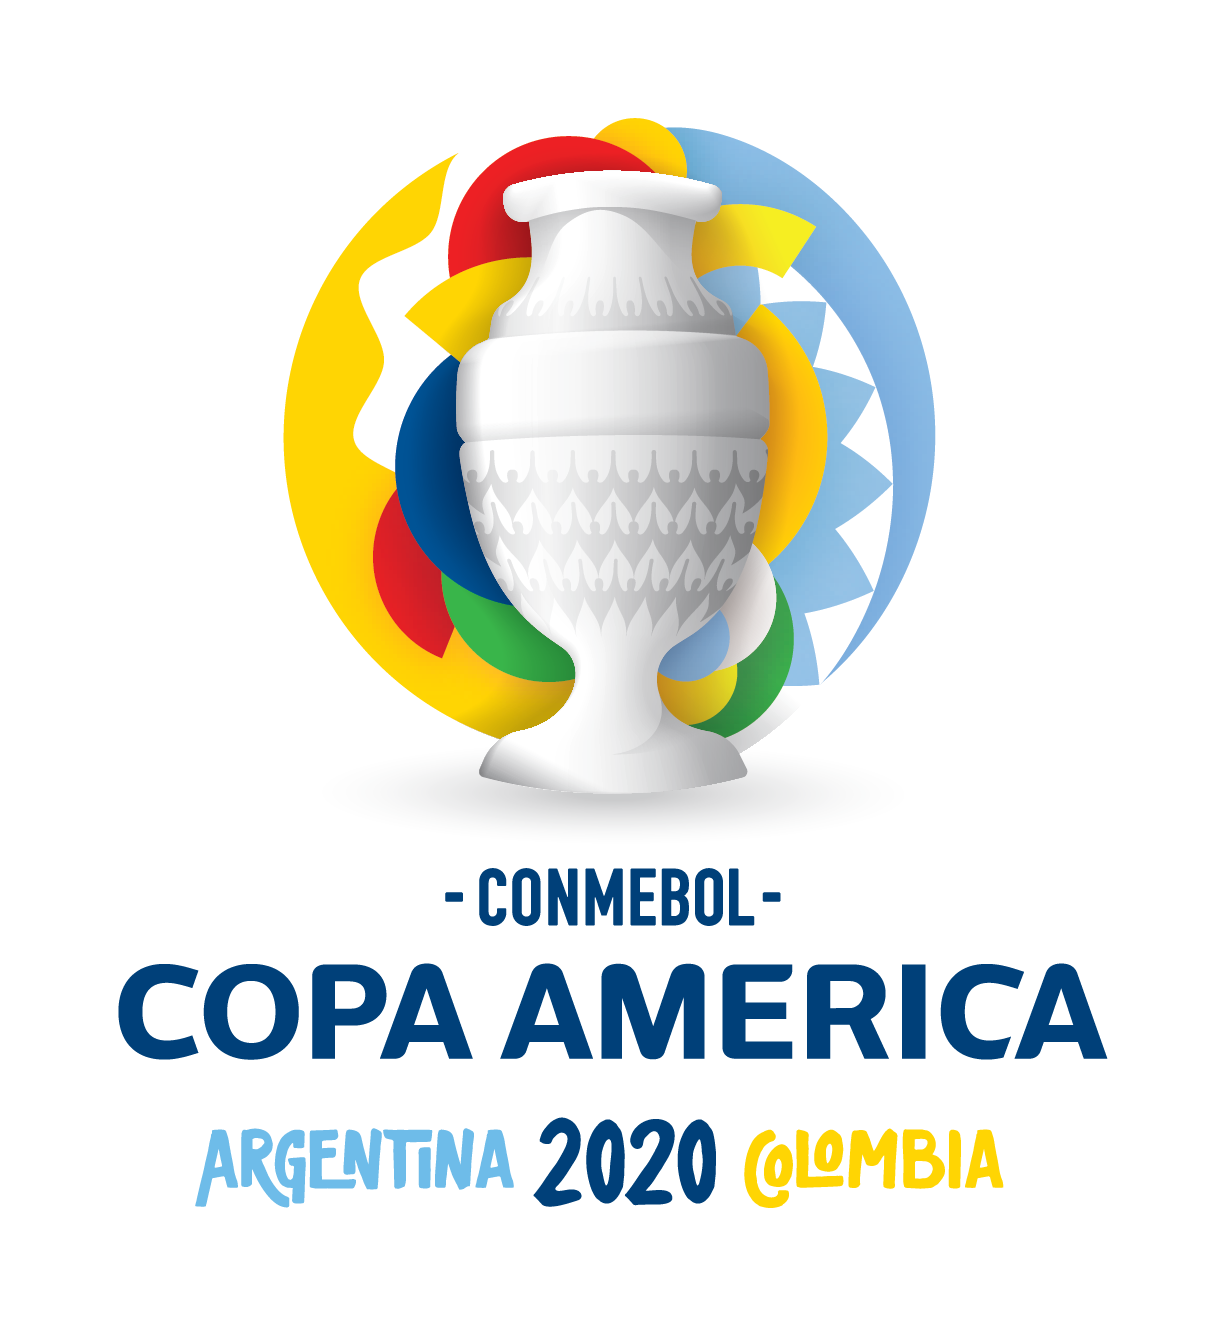 Dentsu Acquires Exclusive Global Commercial Sales Rights of COPA